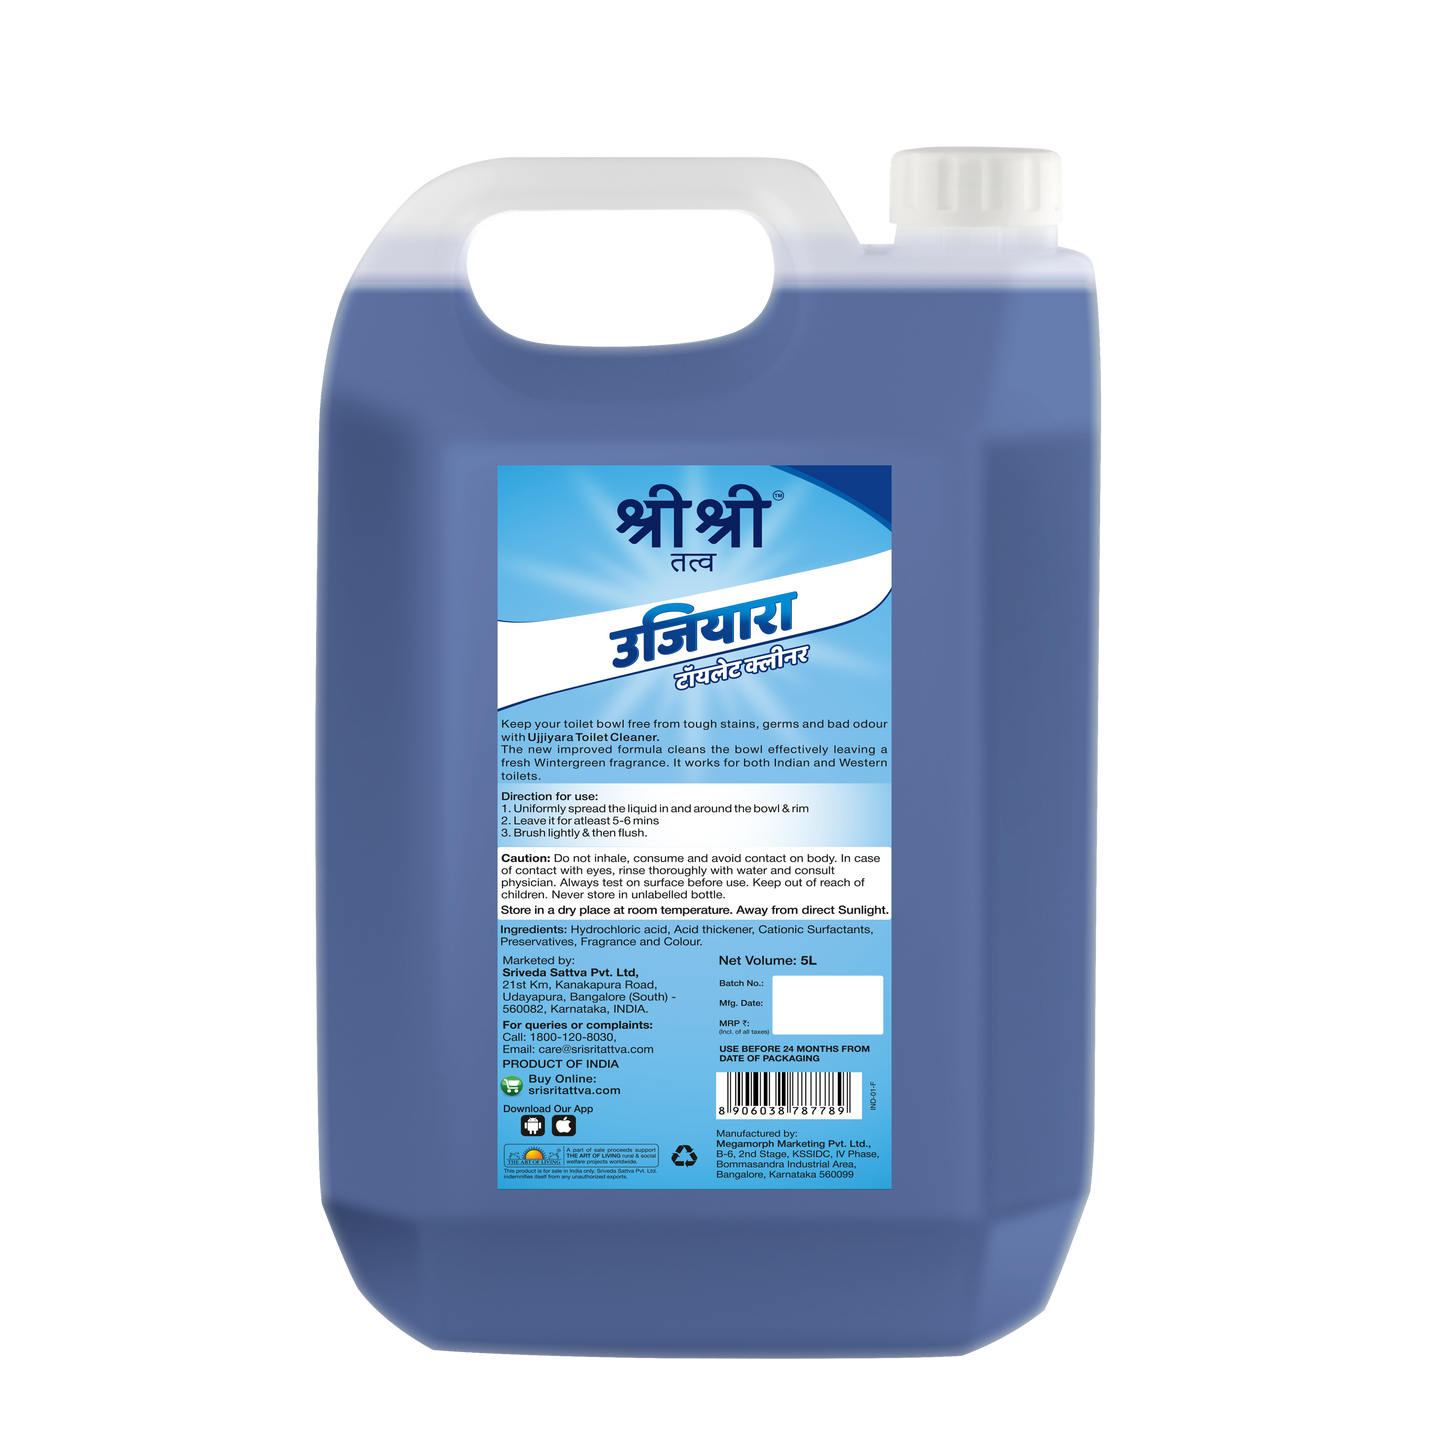 Ujjiyara Toilet Cleaner Winter Green - Removes Stains & Bad Odour,  5 L